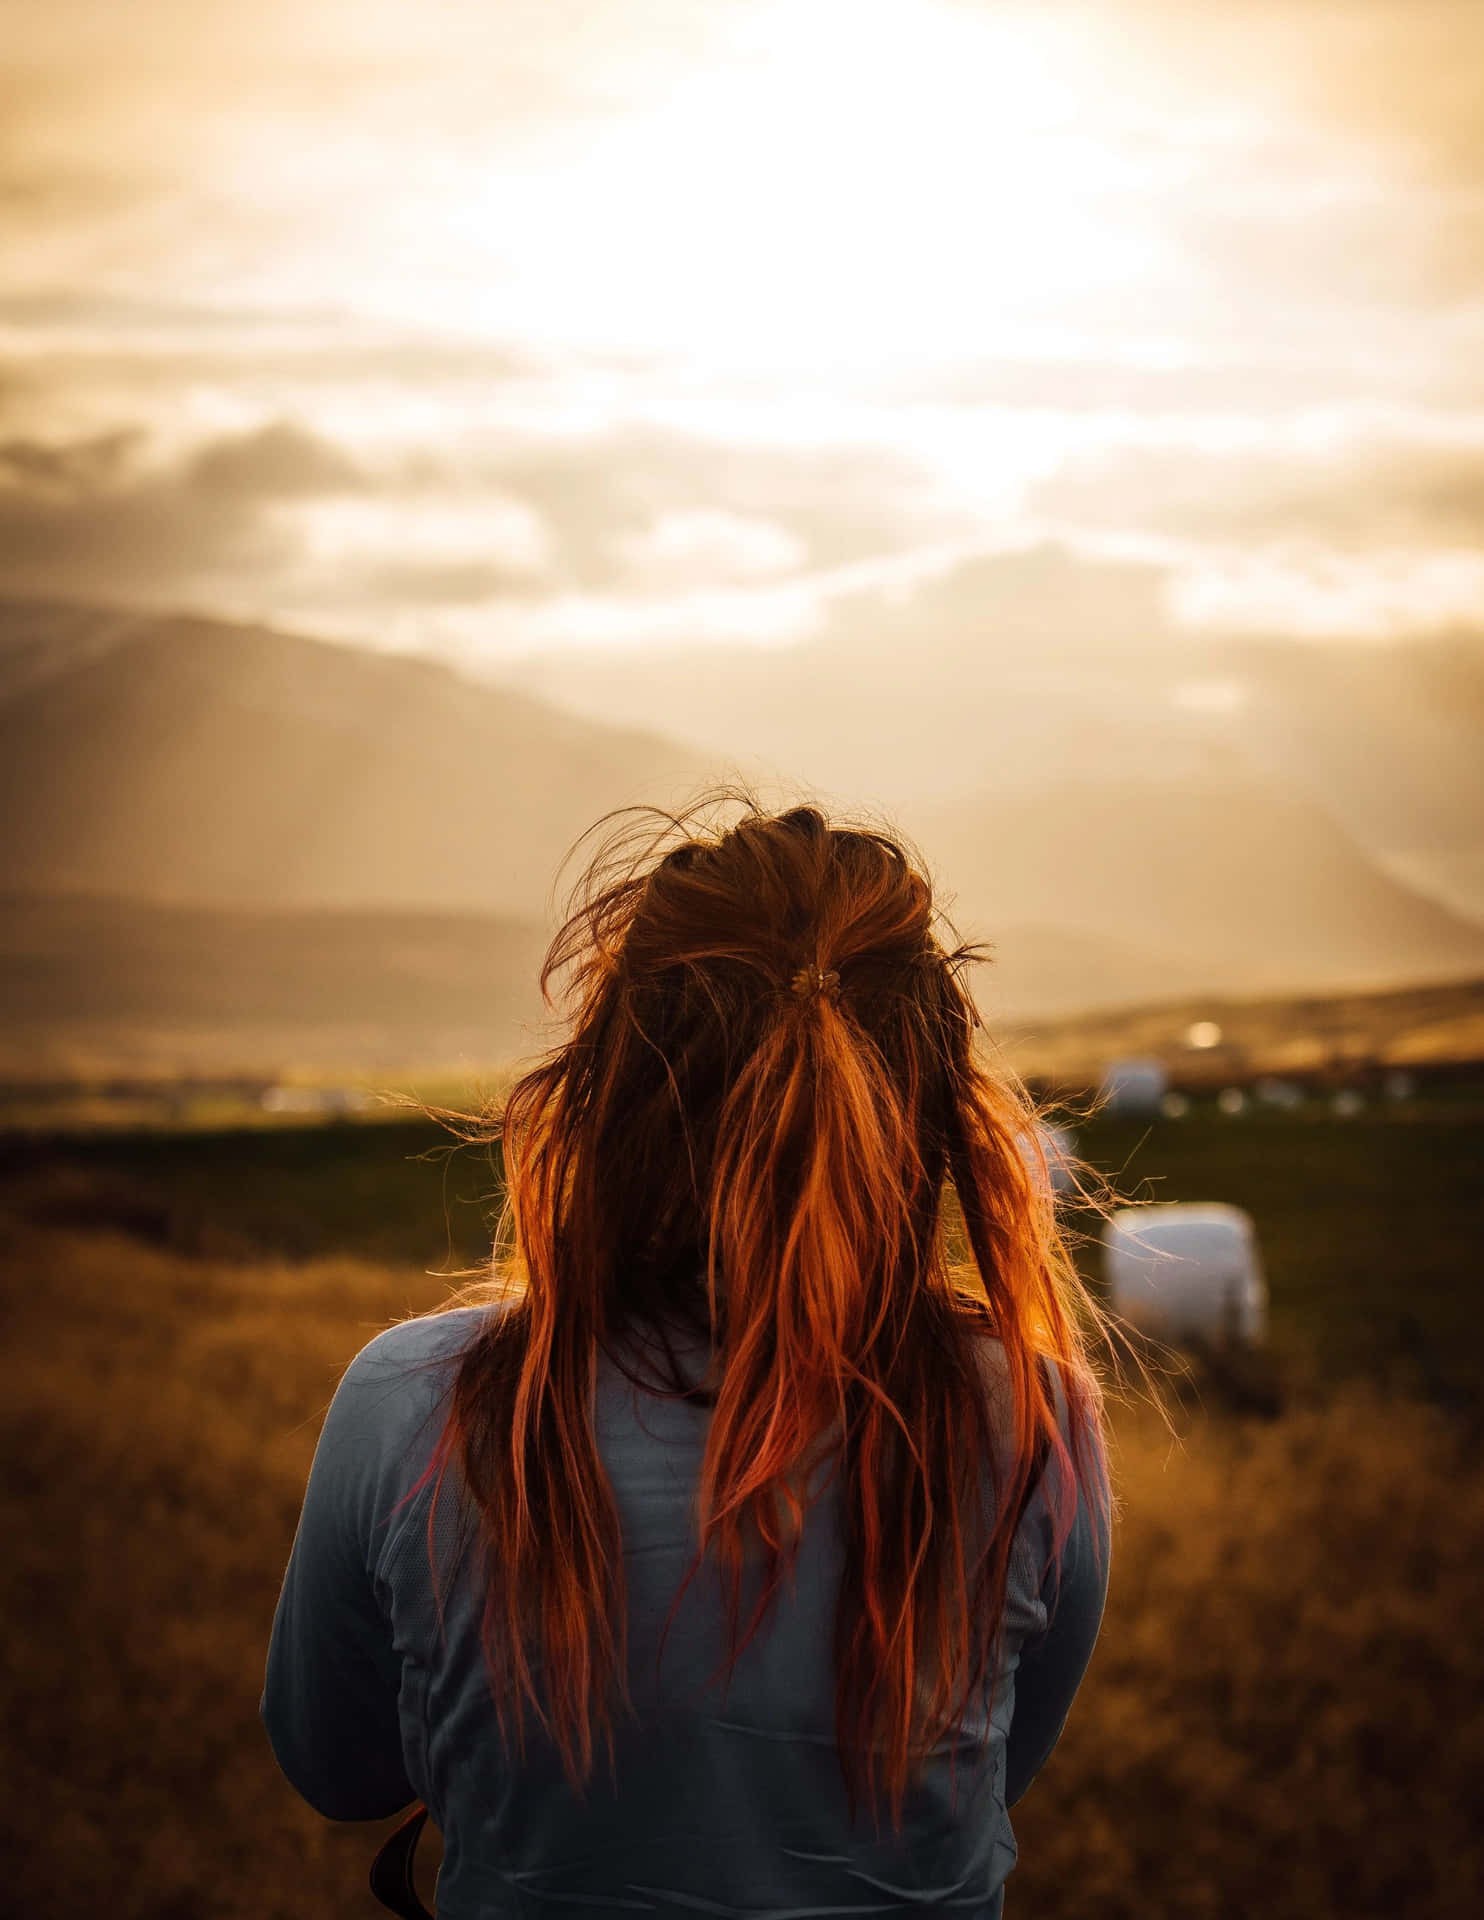 A Woman With Red Hair Looking Out Over A Field